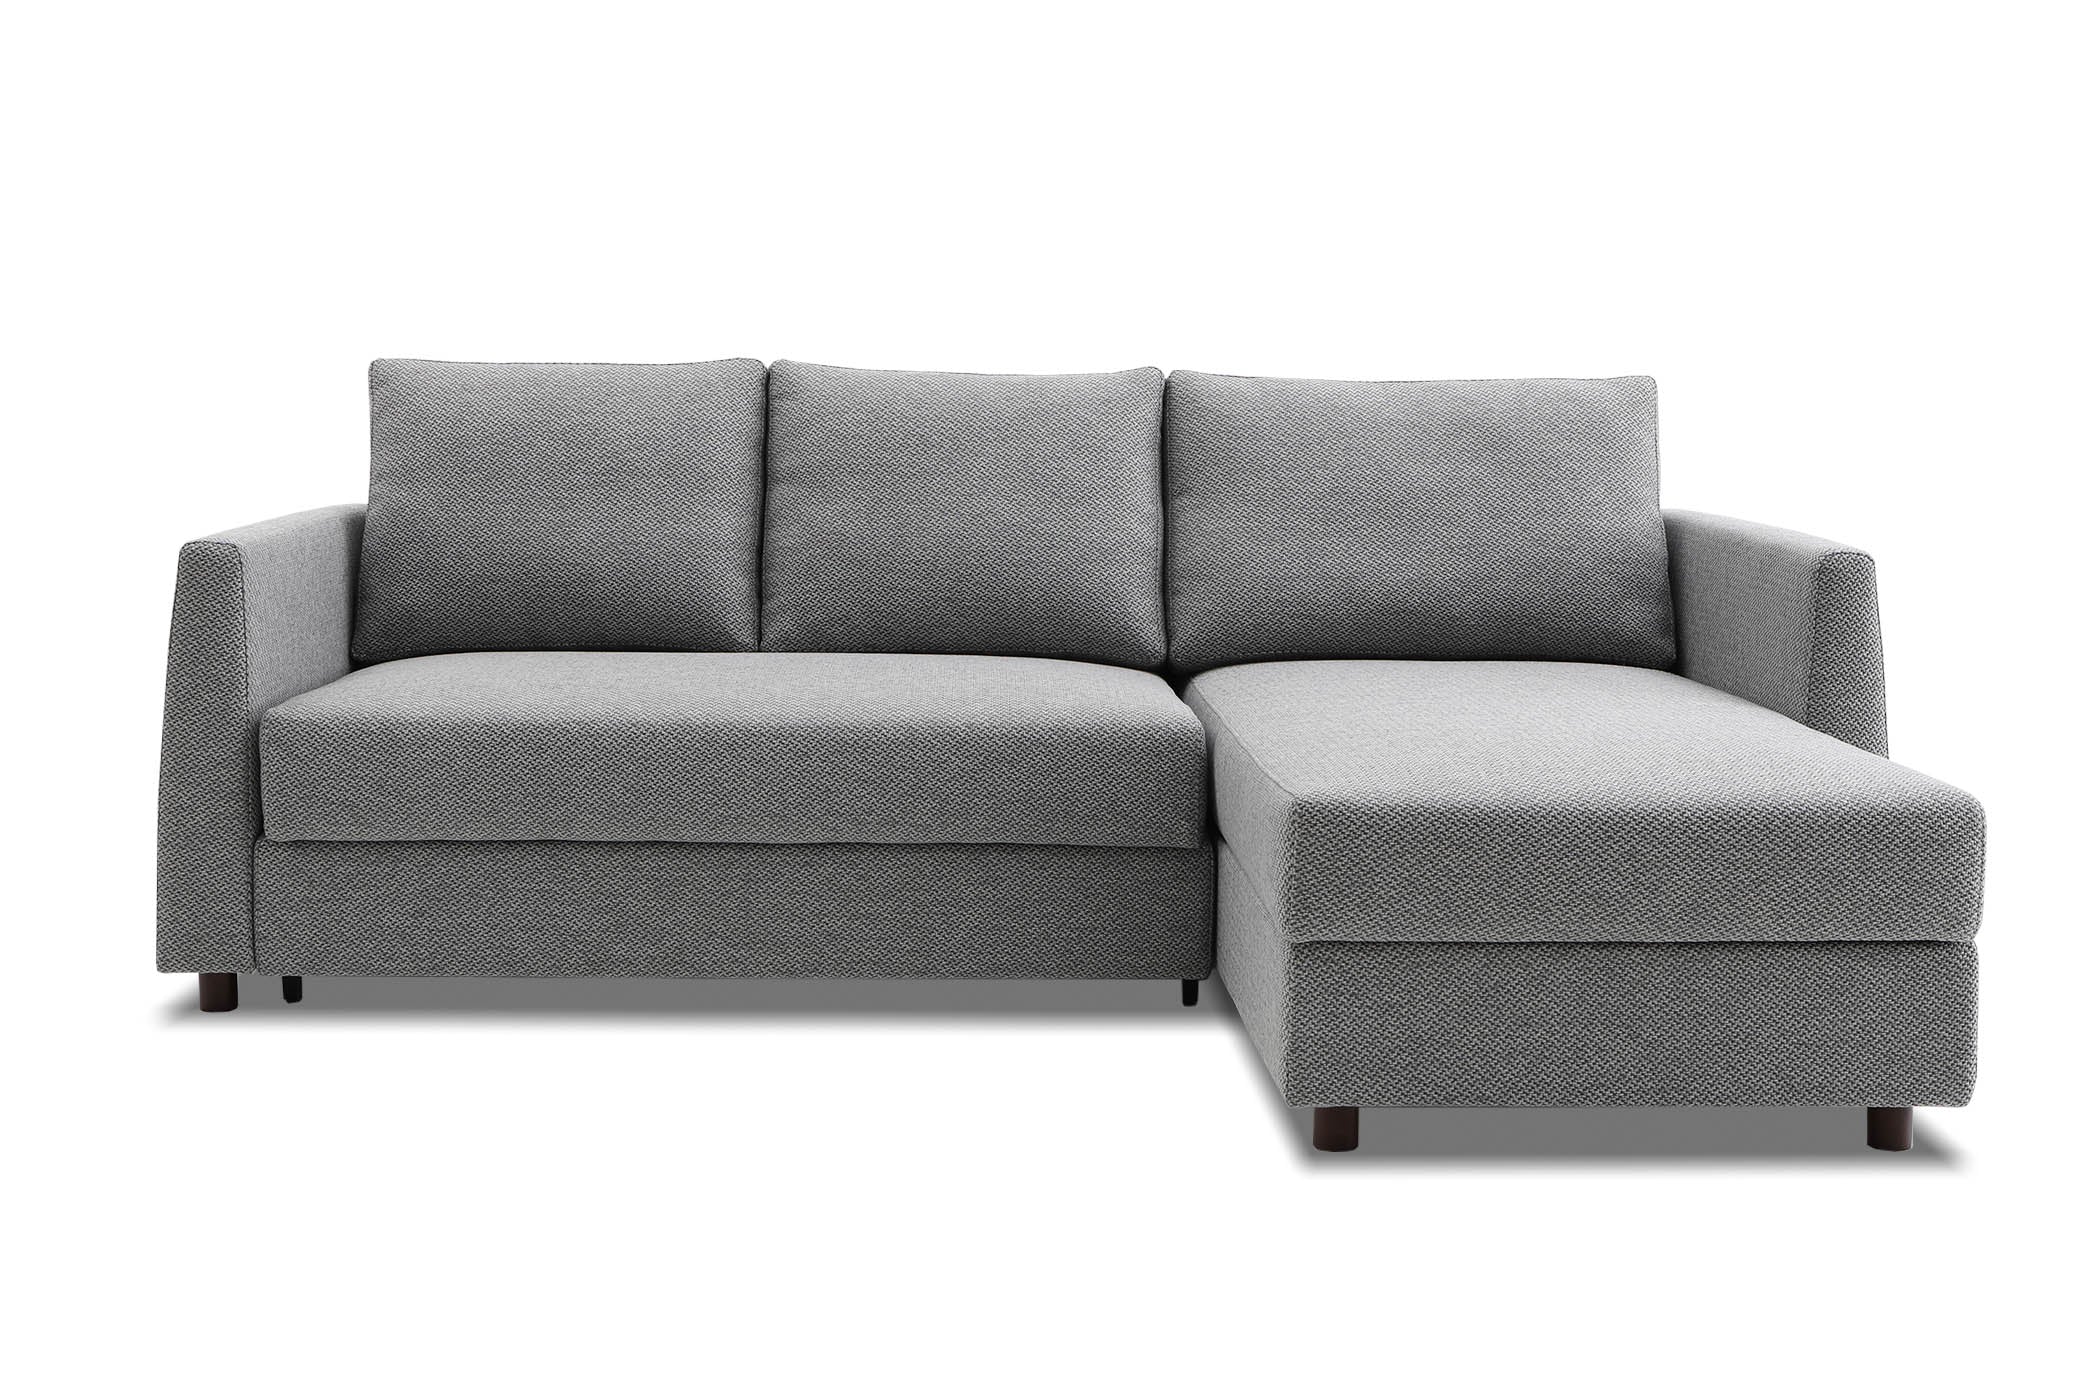 How to make a sofa bed more comfortable? – Spaze Furniture US